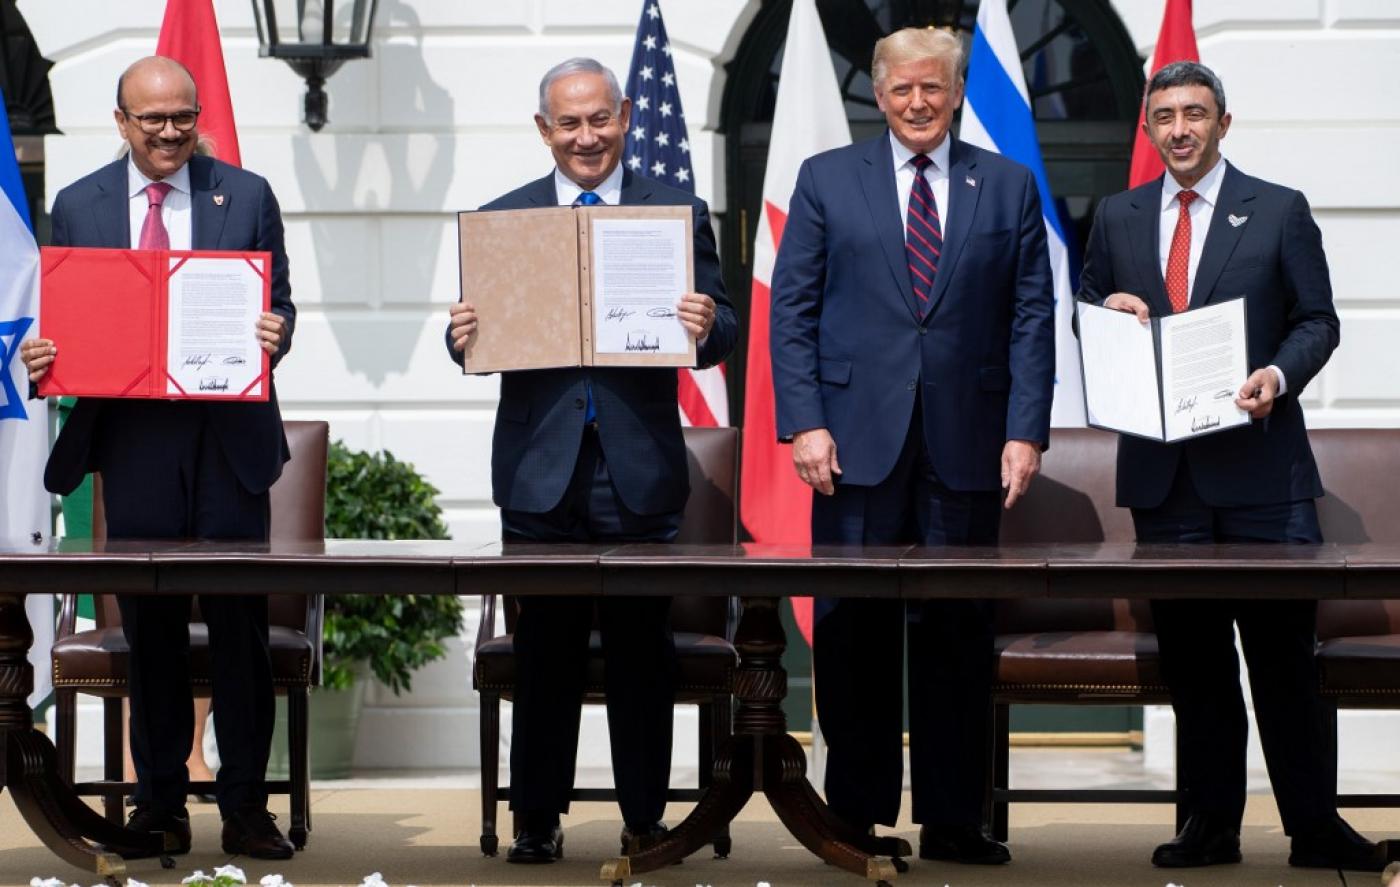 Photo of Trump, Netanyahu and Arab leaders with signed papers in their hands